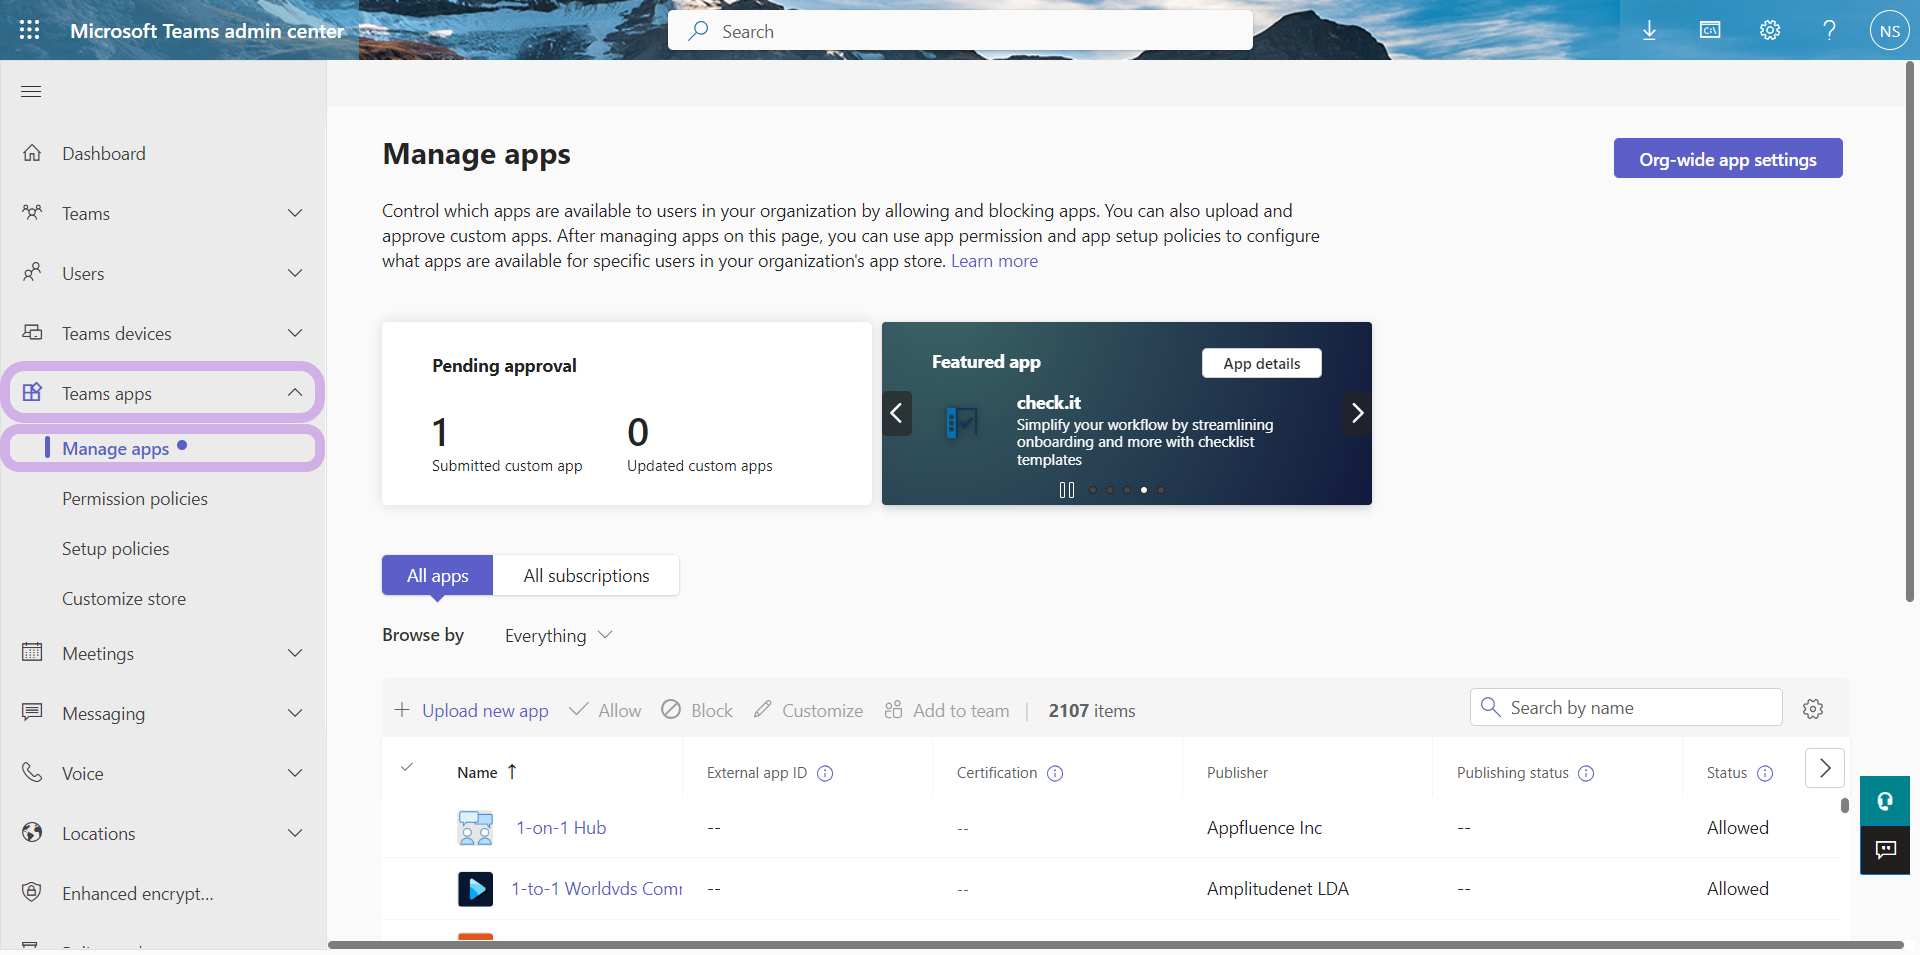 The Microsoft Teams admin center. Manage apps is selected from the left-side menu.